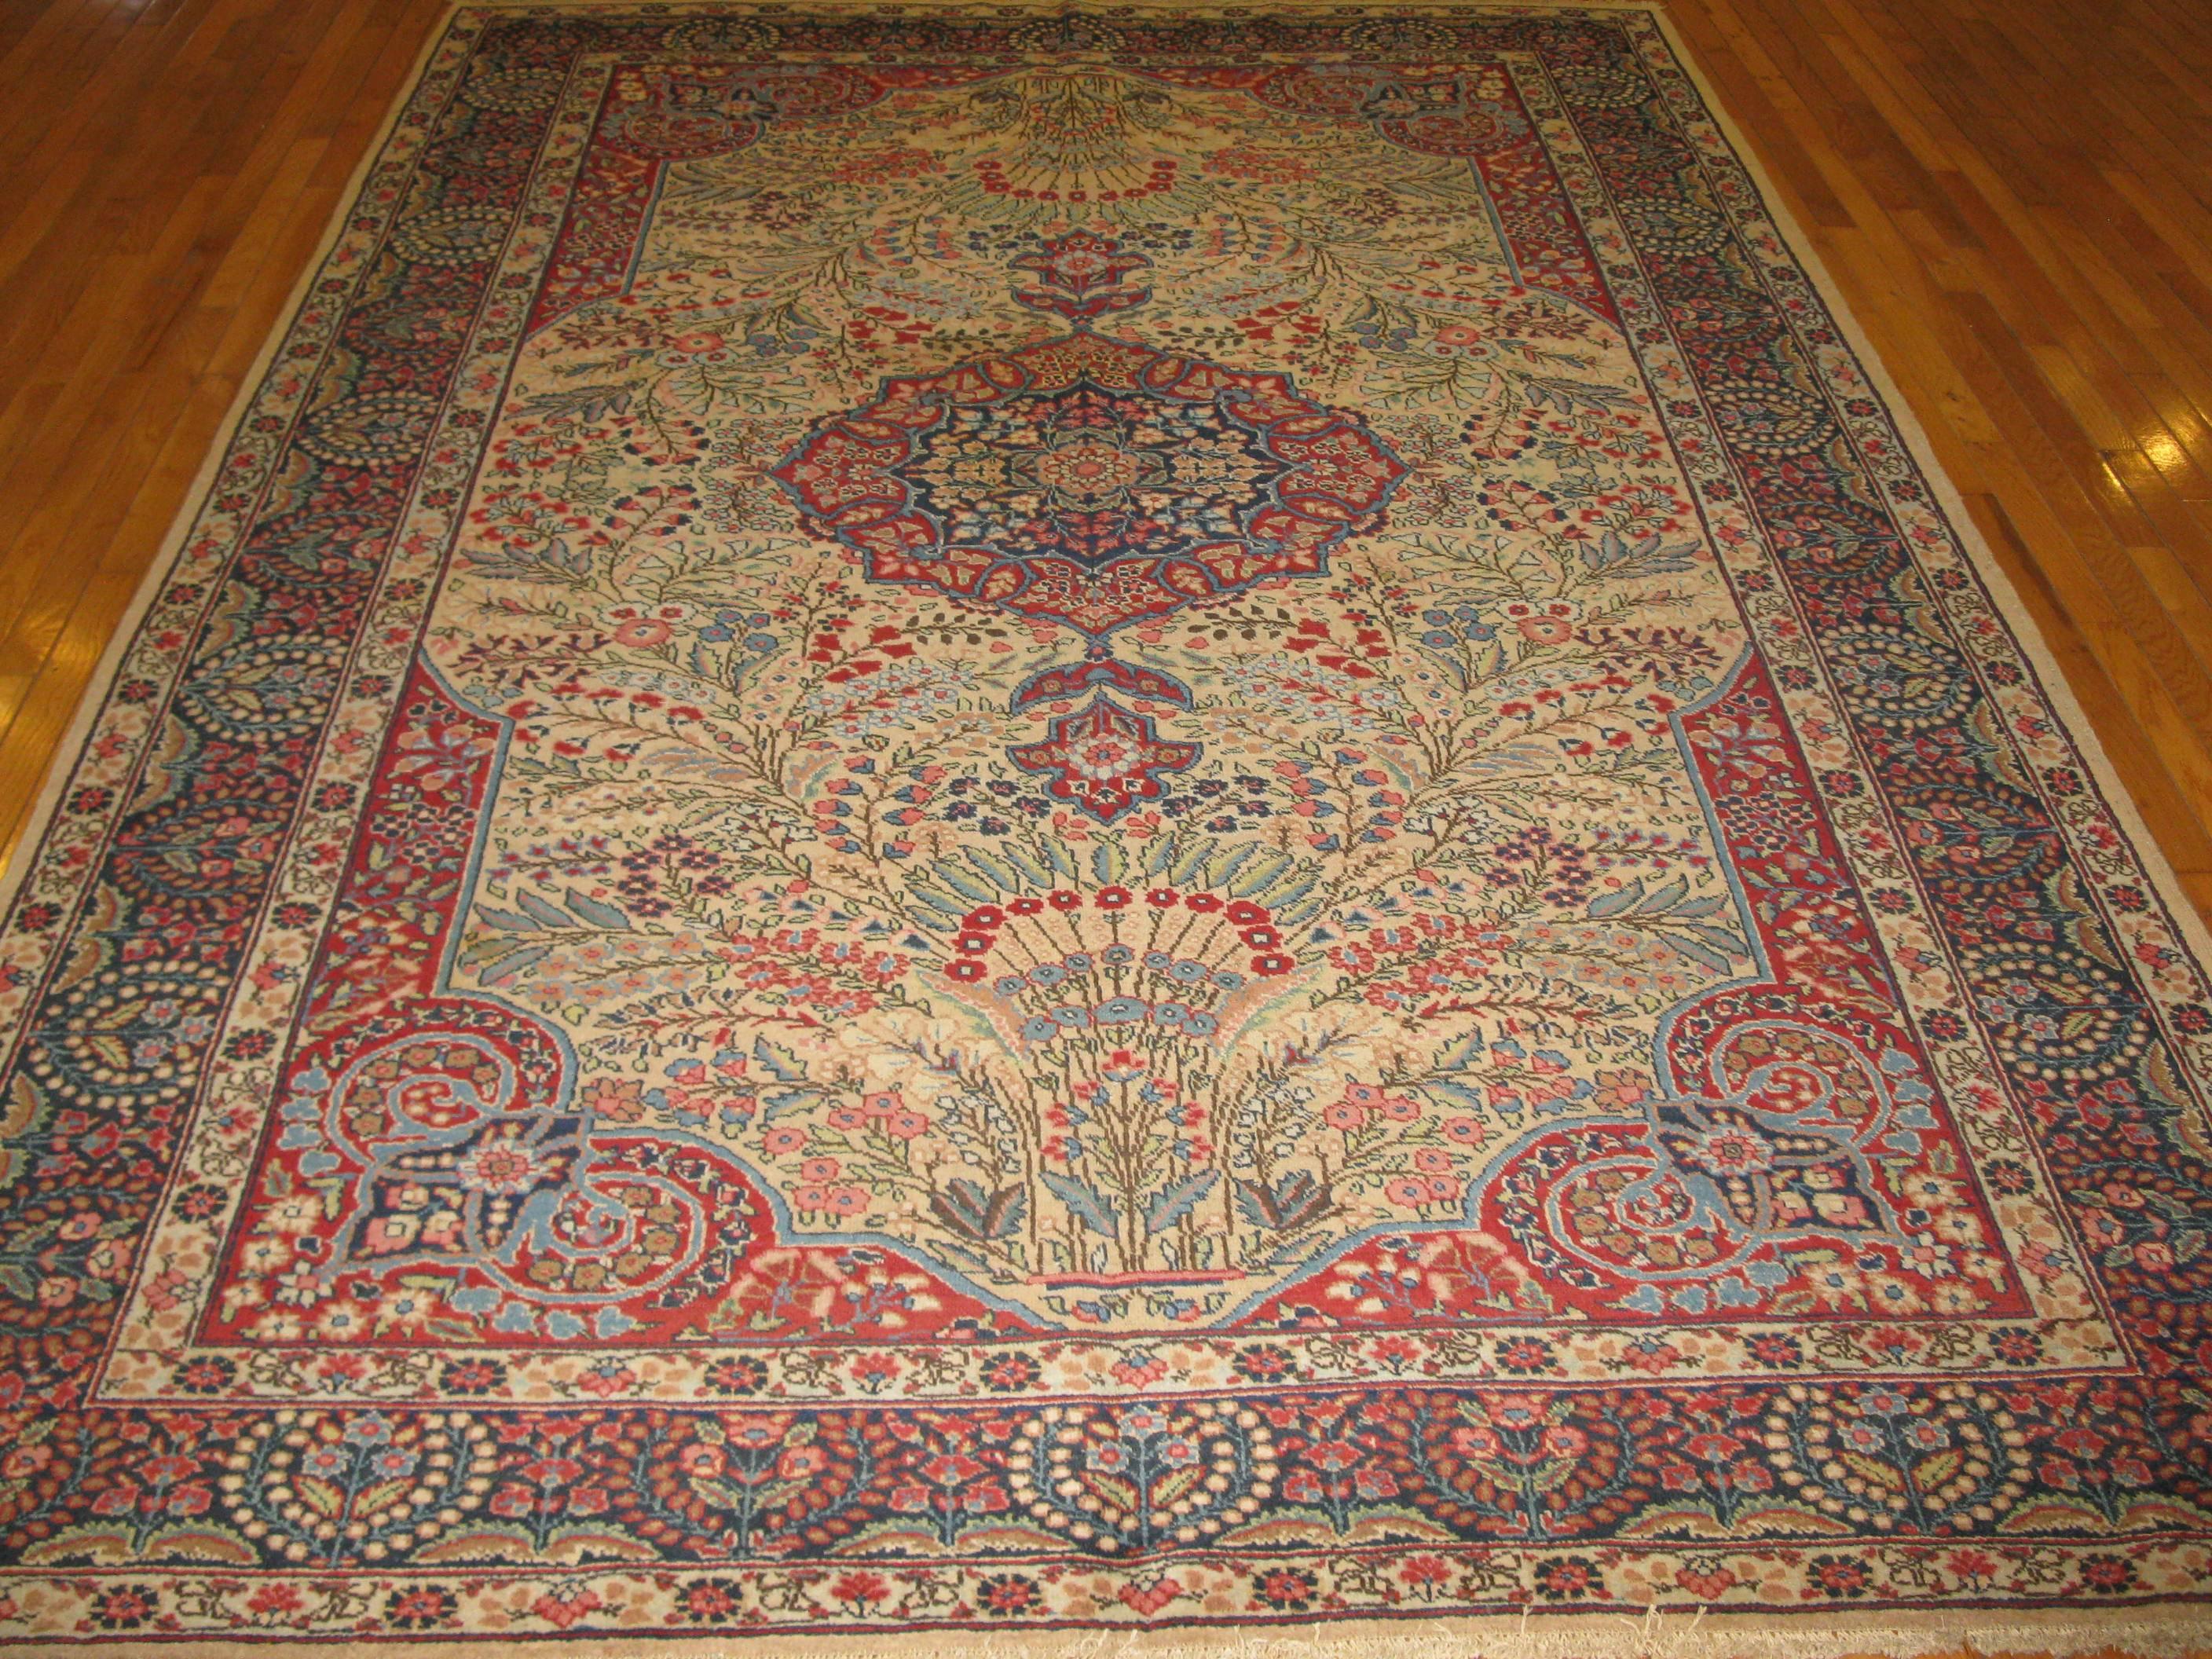 This is a beautiful antique hand-knotted Persian Kerman rug with an elegant traditional central and corner medallion design. It is made with wool pile colored with natural dyes on a cotton foundation. The rug measures 6'6" x 10'.